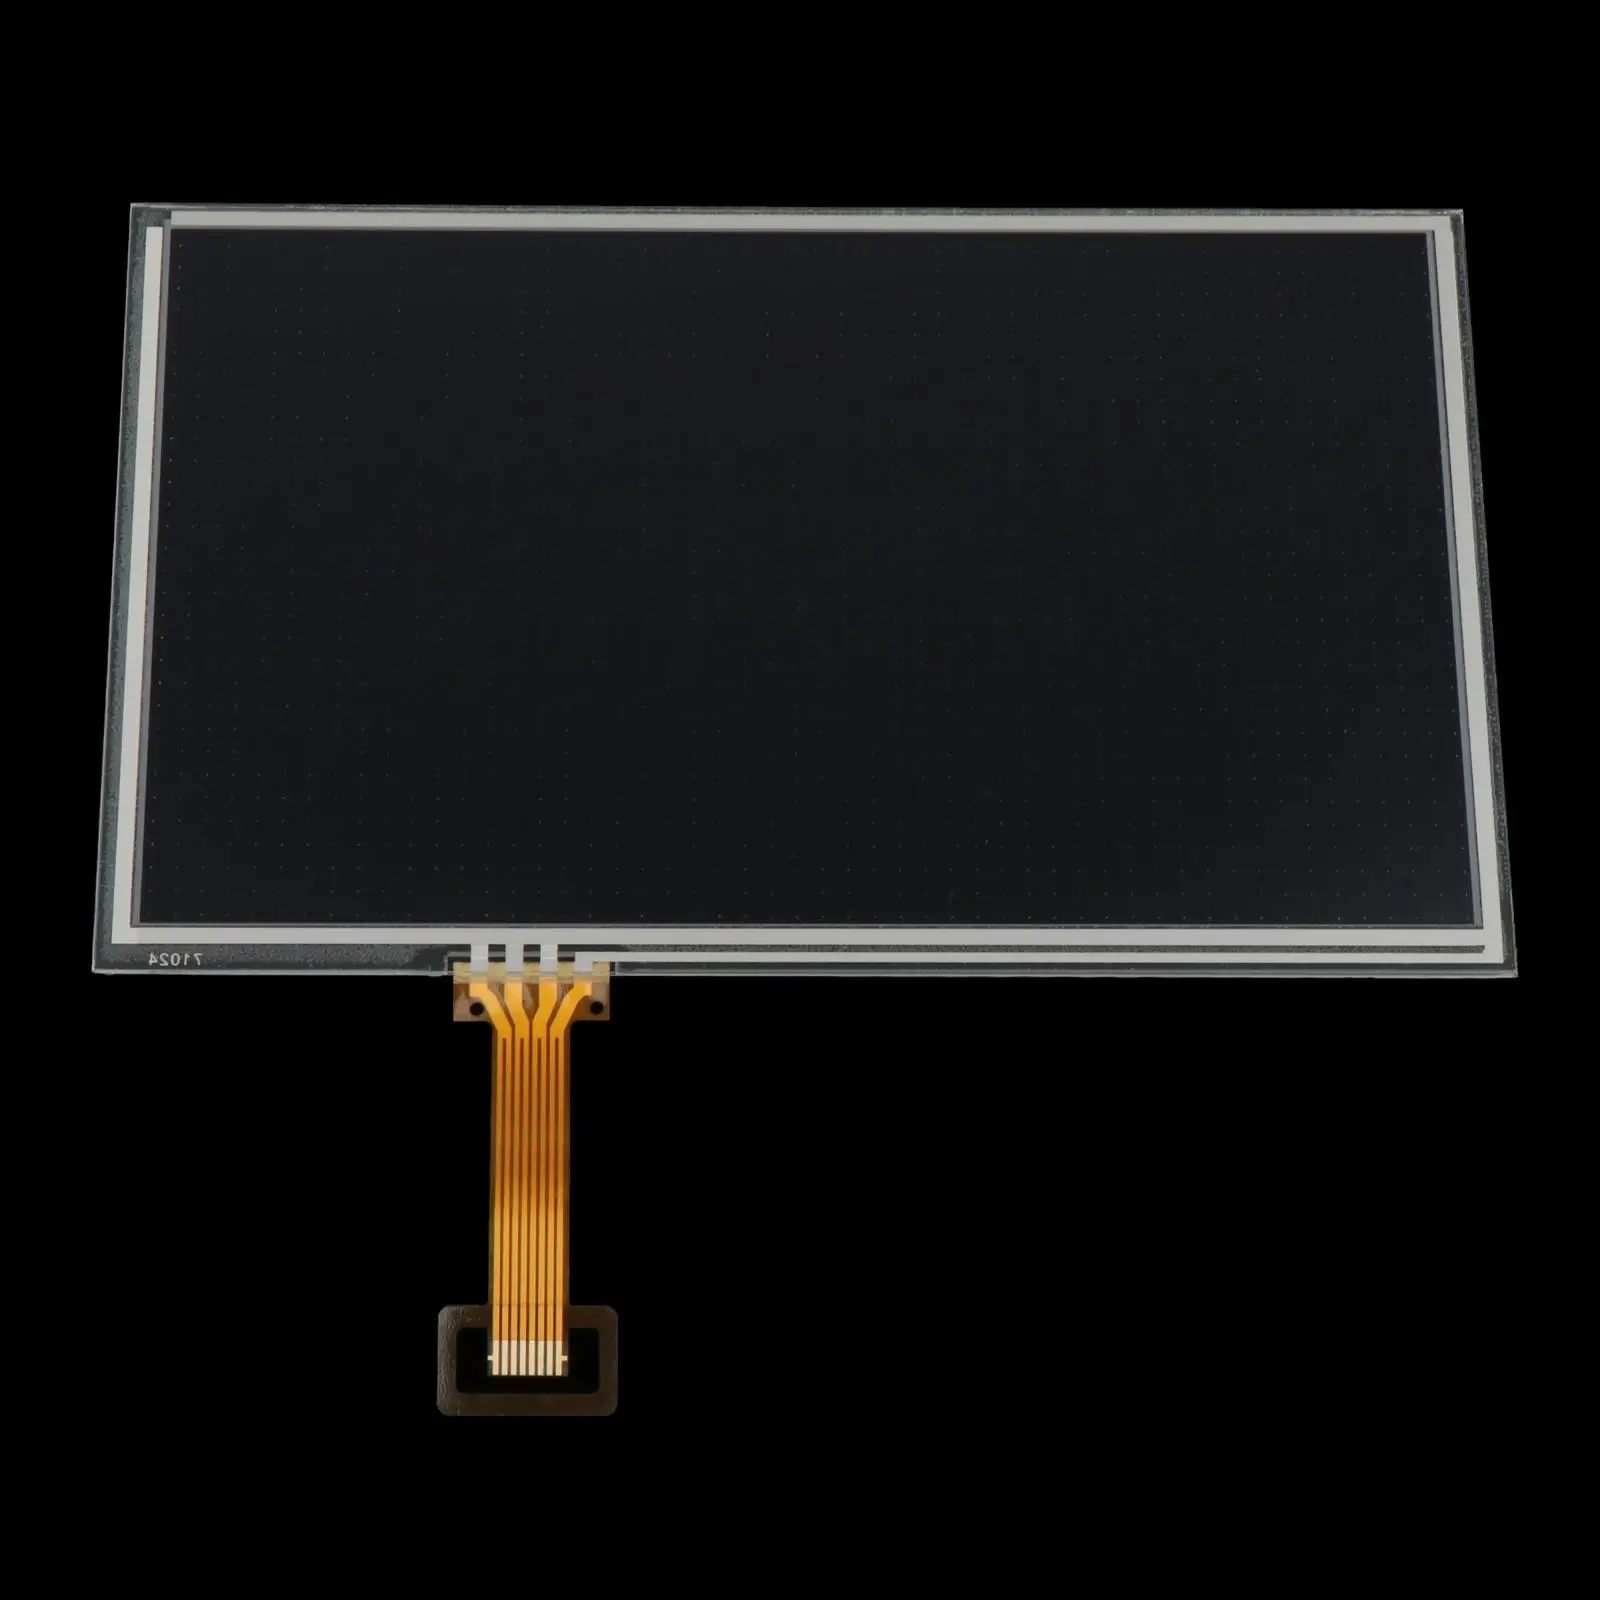 Replacement Touch Screen Glass Digitizer for Hyundai Sonata Veloster 2013-2016